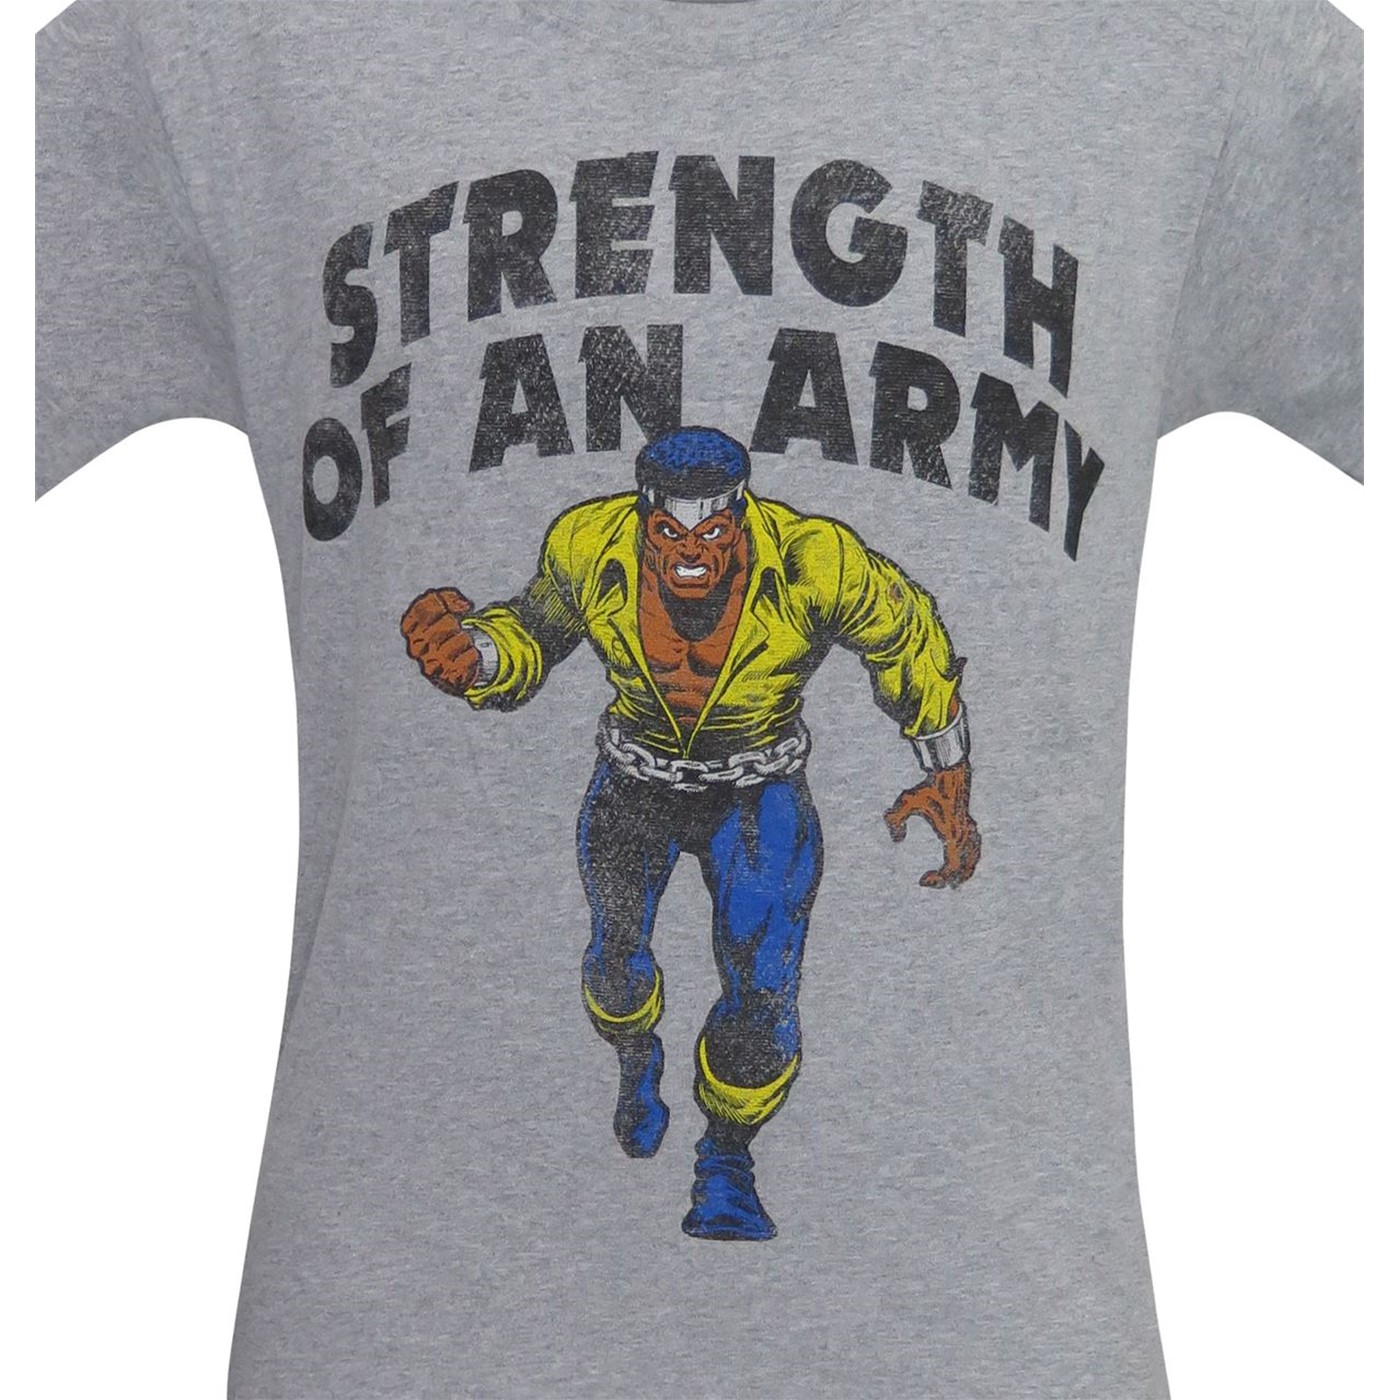 Luke Cage Strength of an Army Men's T-Shirt